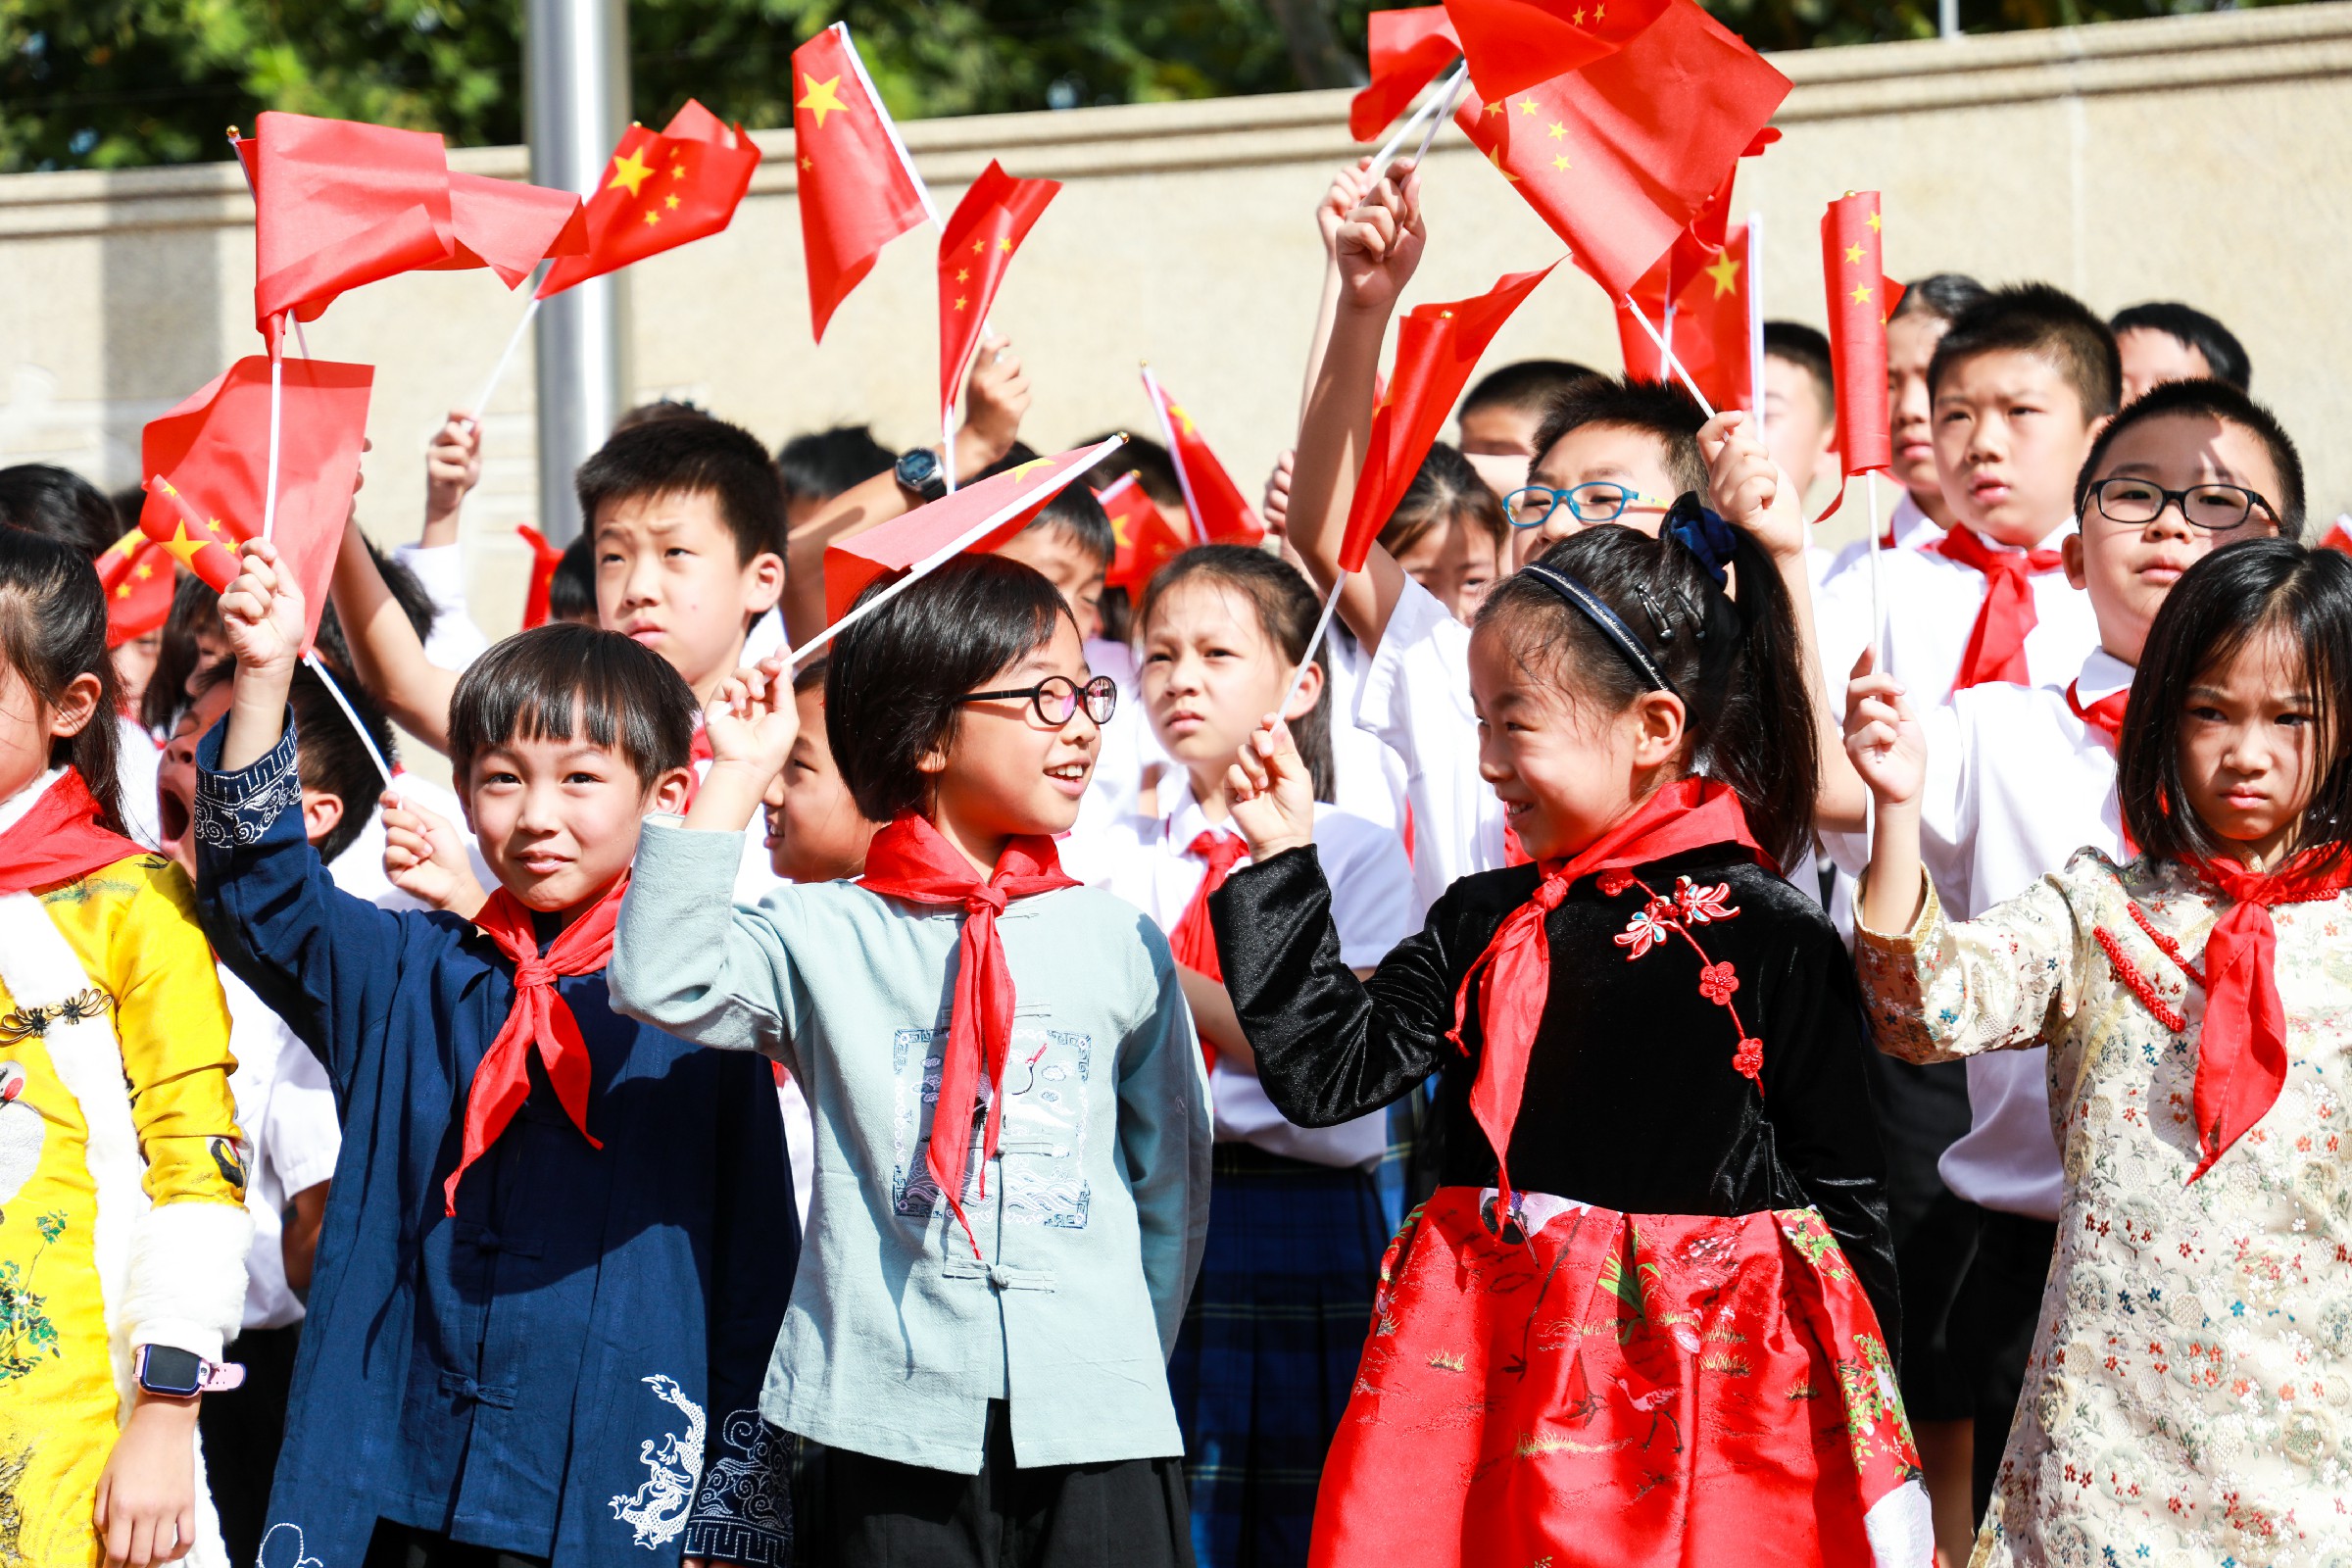 Celebrating 70th anniversary of the People's Republic of China